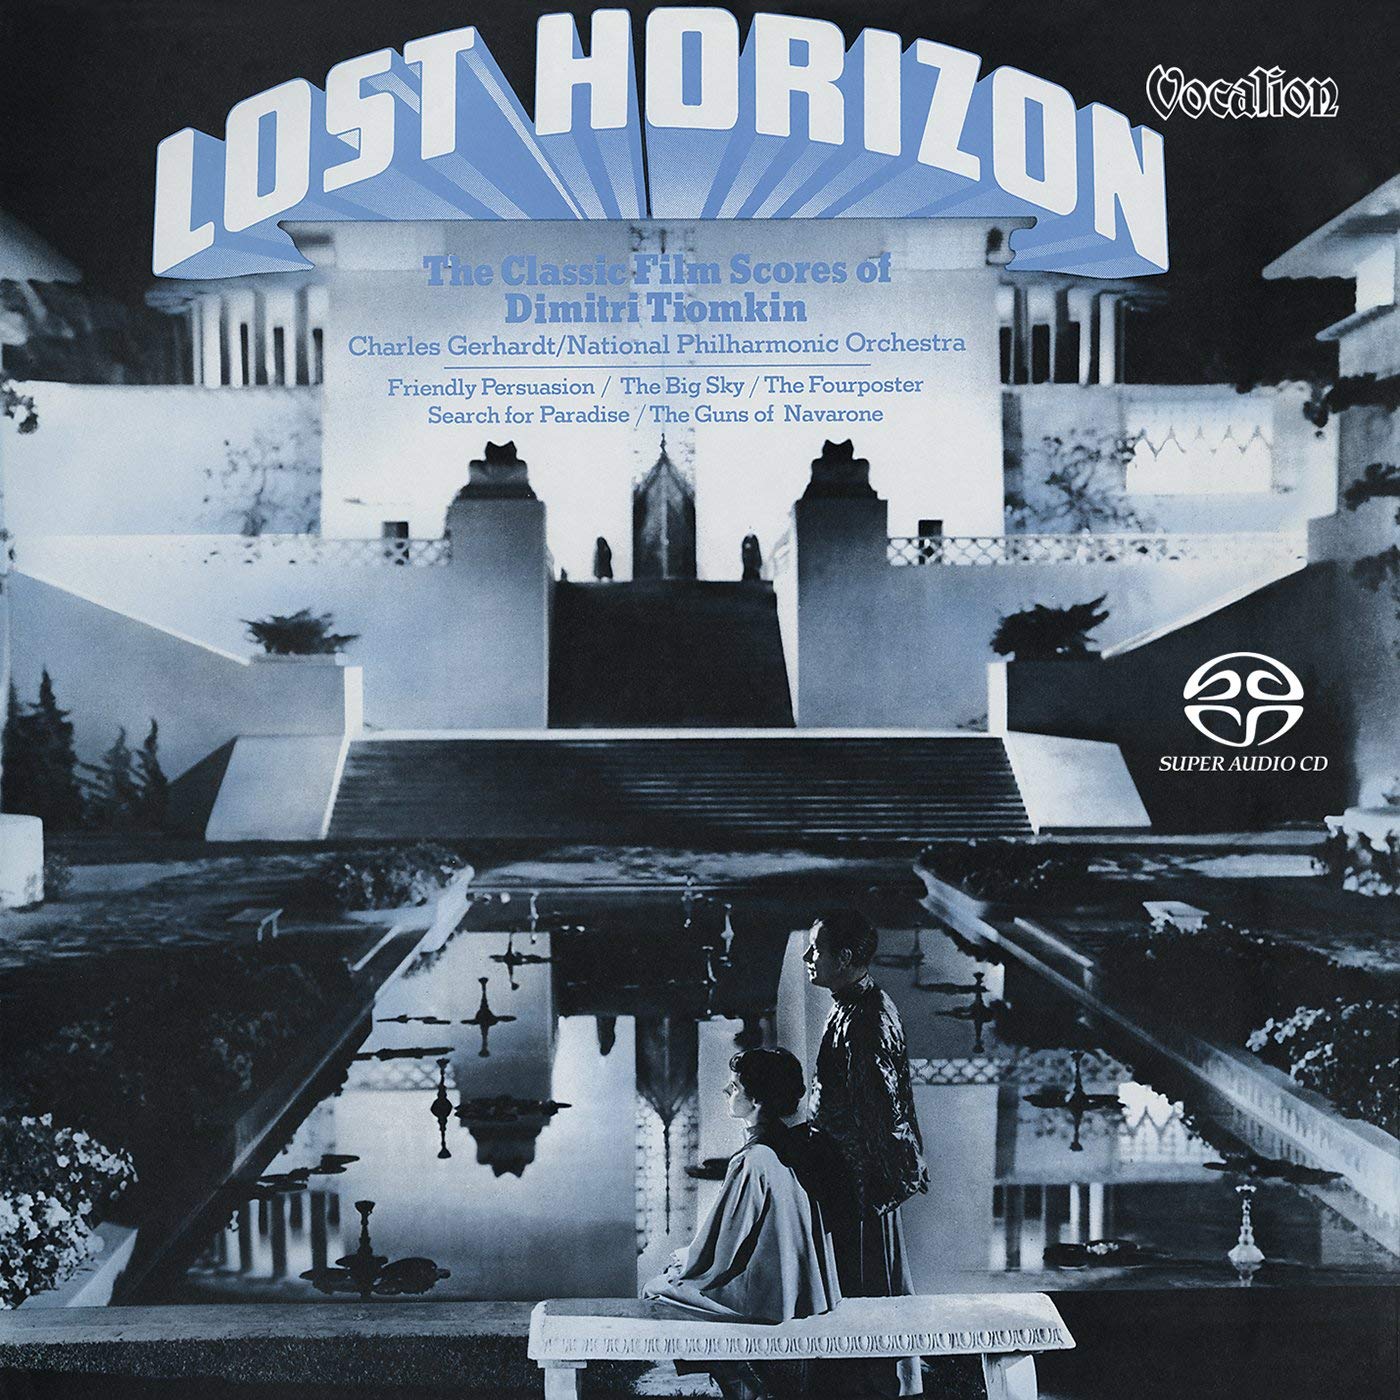 Charles Gerhardt, National Philharmonic Orchestra – Lost Horizon / The Thing From Another World (1976/77) [Reissue 2017] SACD ISO + Hi-Res FLAC